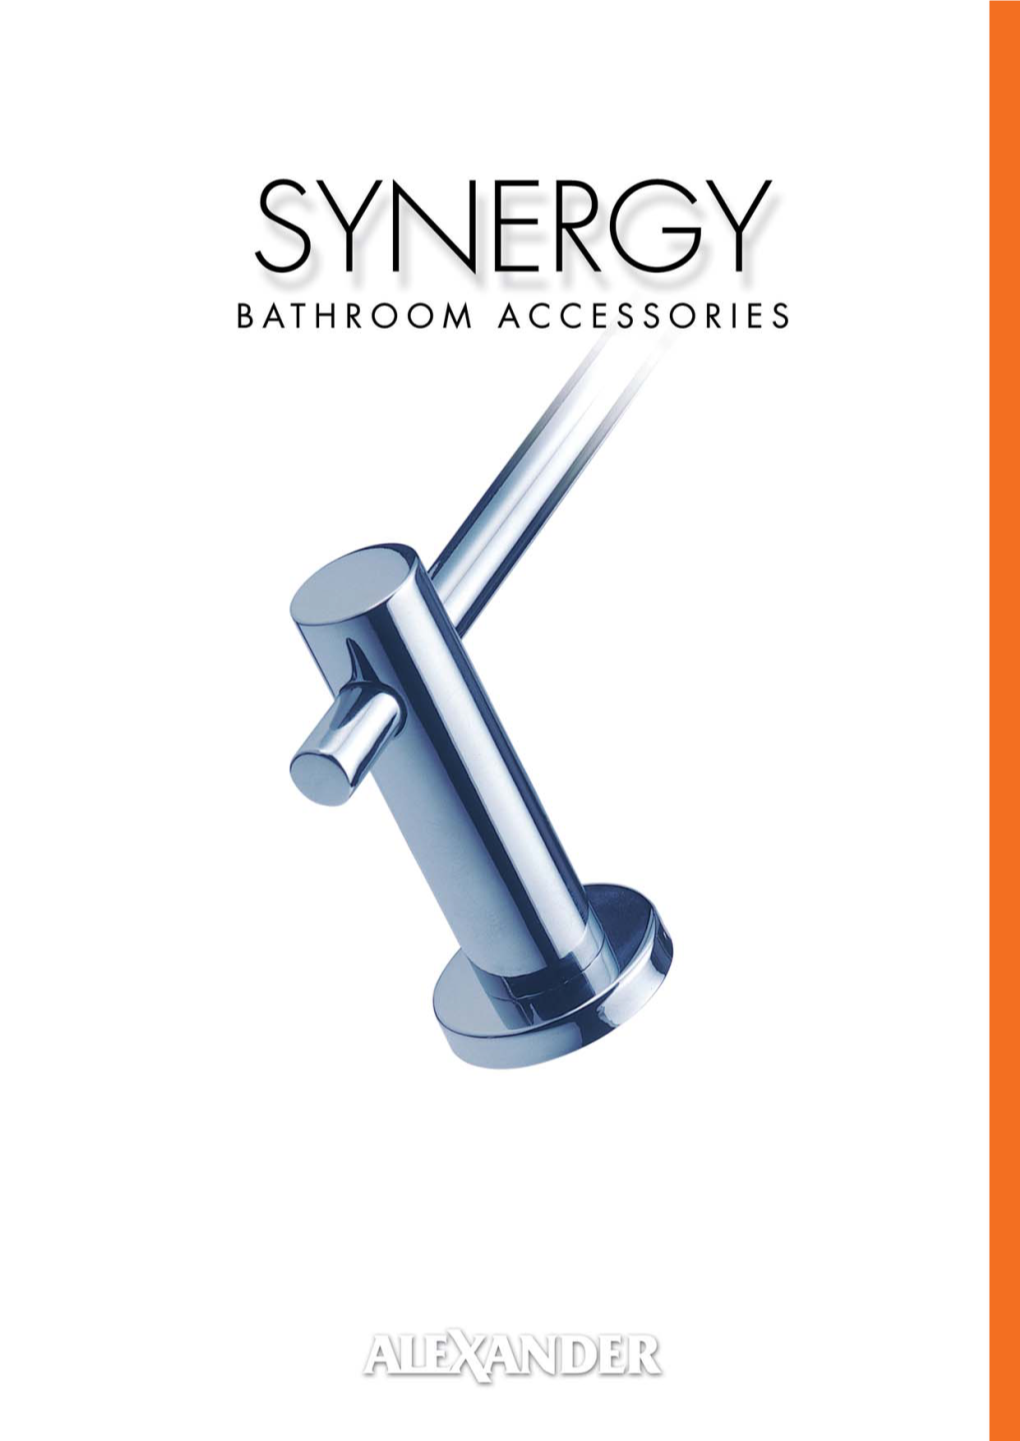 Alexander Synergy Product Information.Pdf